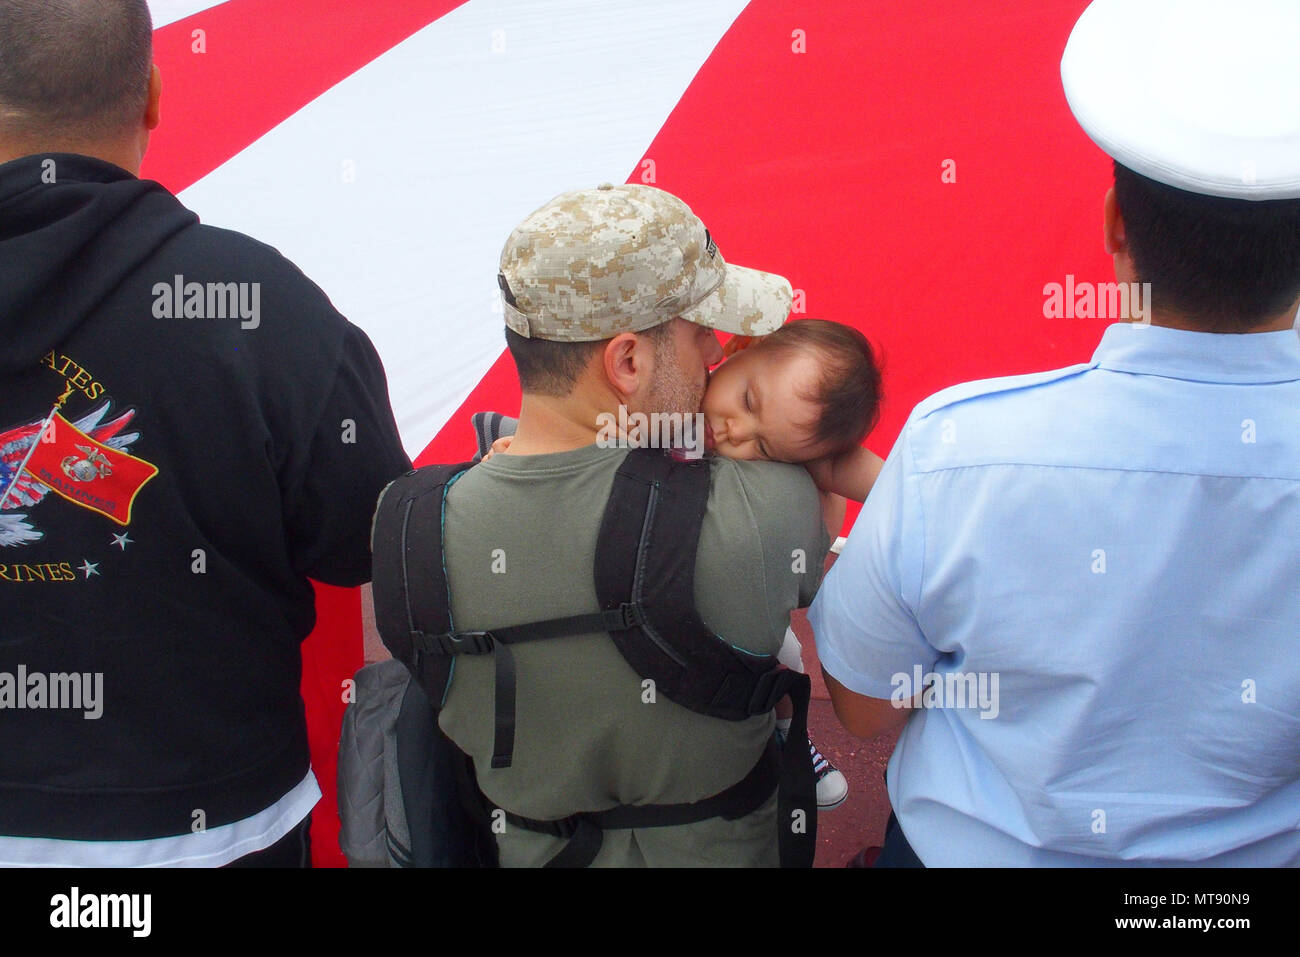 May 28, 2018 - New York, New York, U.S. - Memorial Day Ceremony on Intrepid Sea,Air & Space Museum in New York City.  Veteran Carlos Jimenez with Daughter Livia who is 10 months old (Credit Image: © Bruce Cotler/Globe Photos via ZUMA Wire) Stock Photo